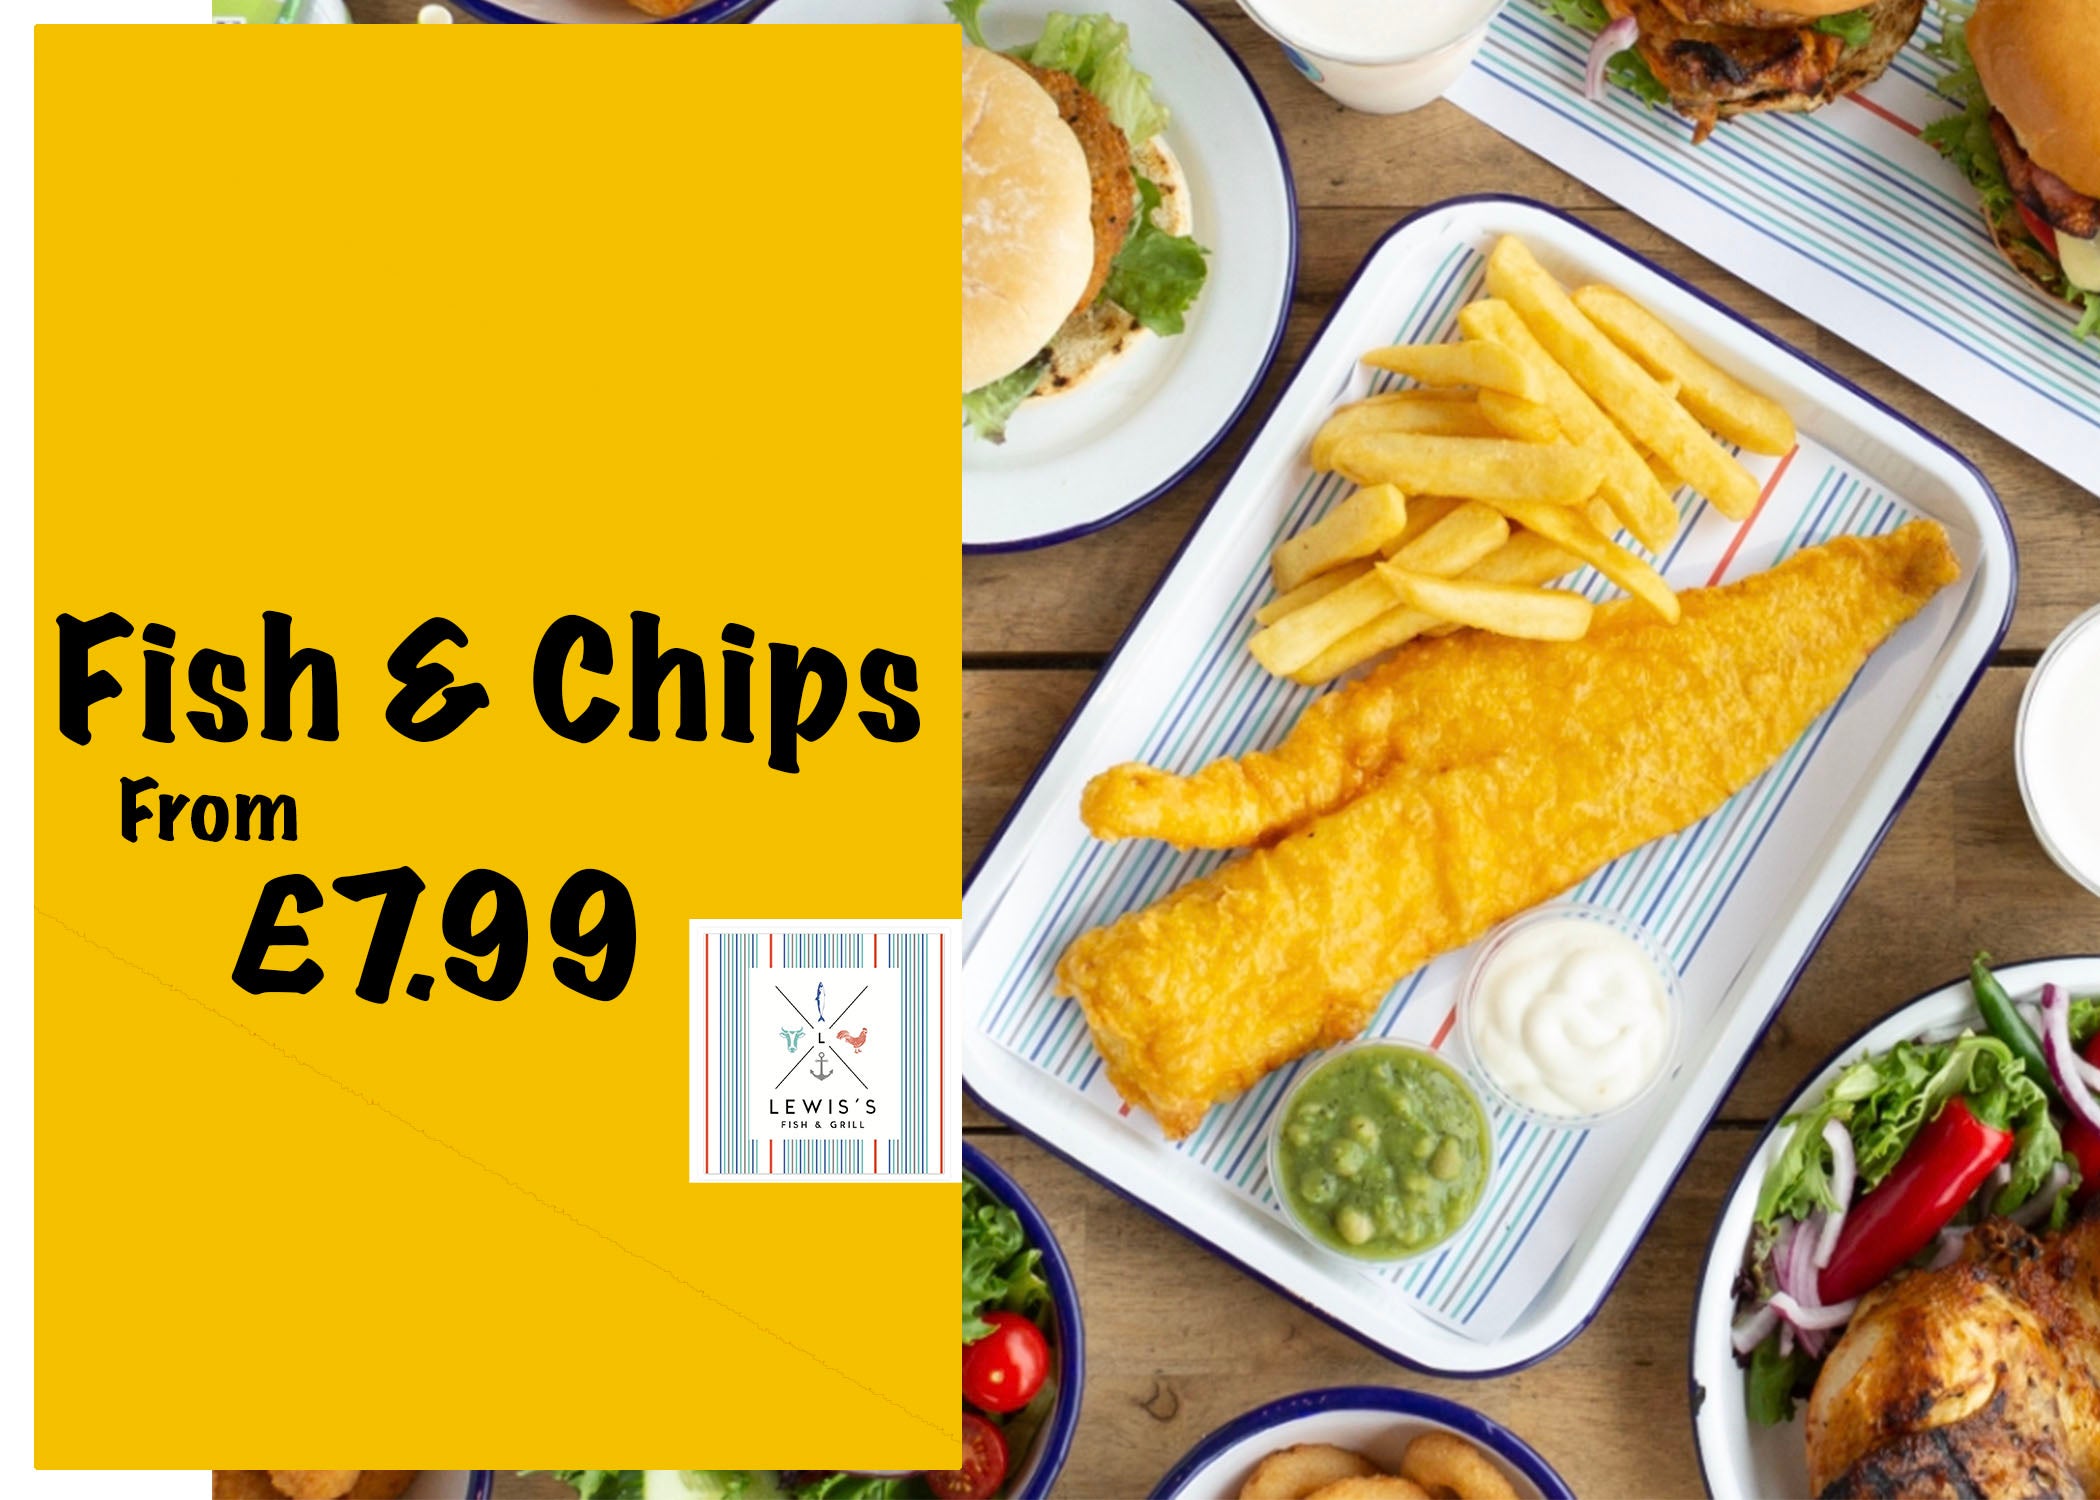 Lewis's Fish & Grill - Maidstone delivery from Maidstone Center - Order ...